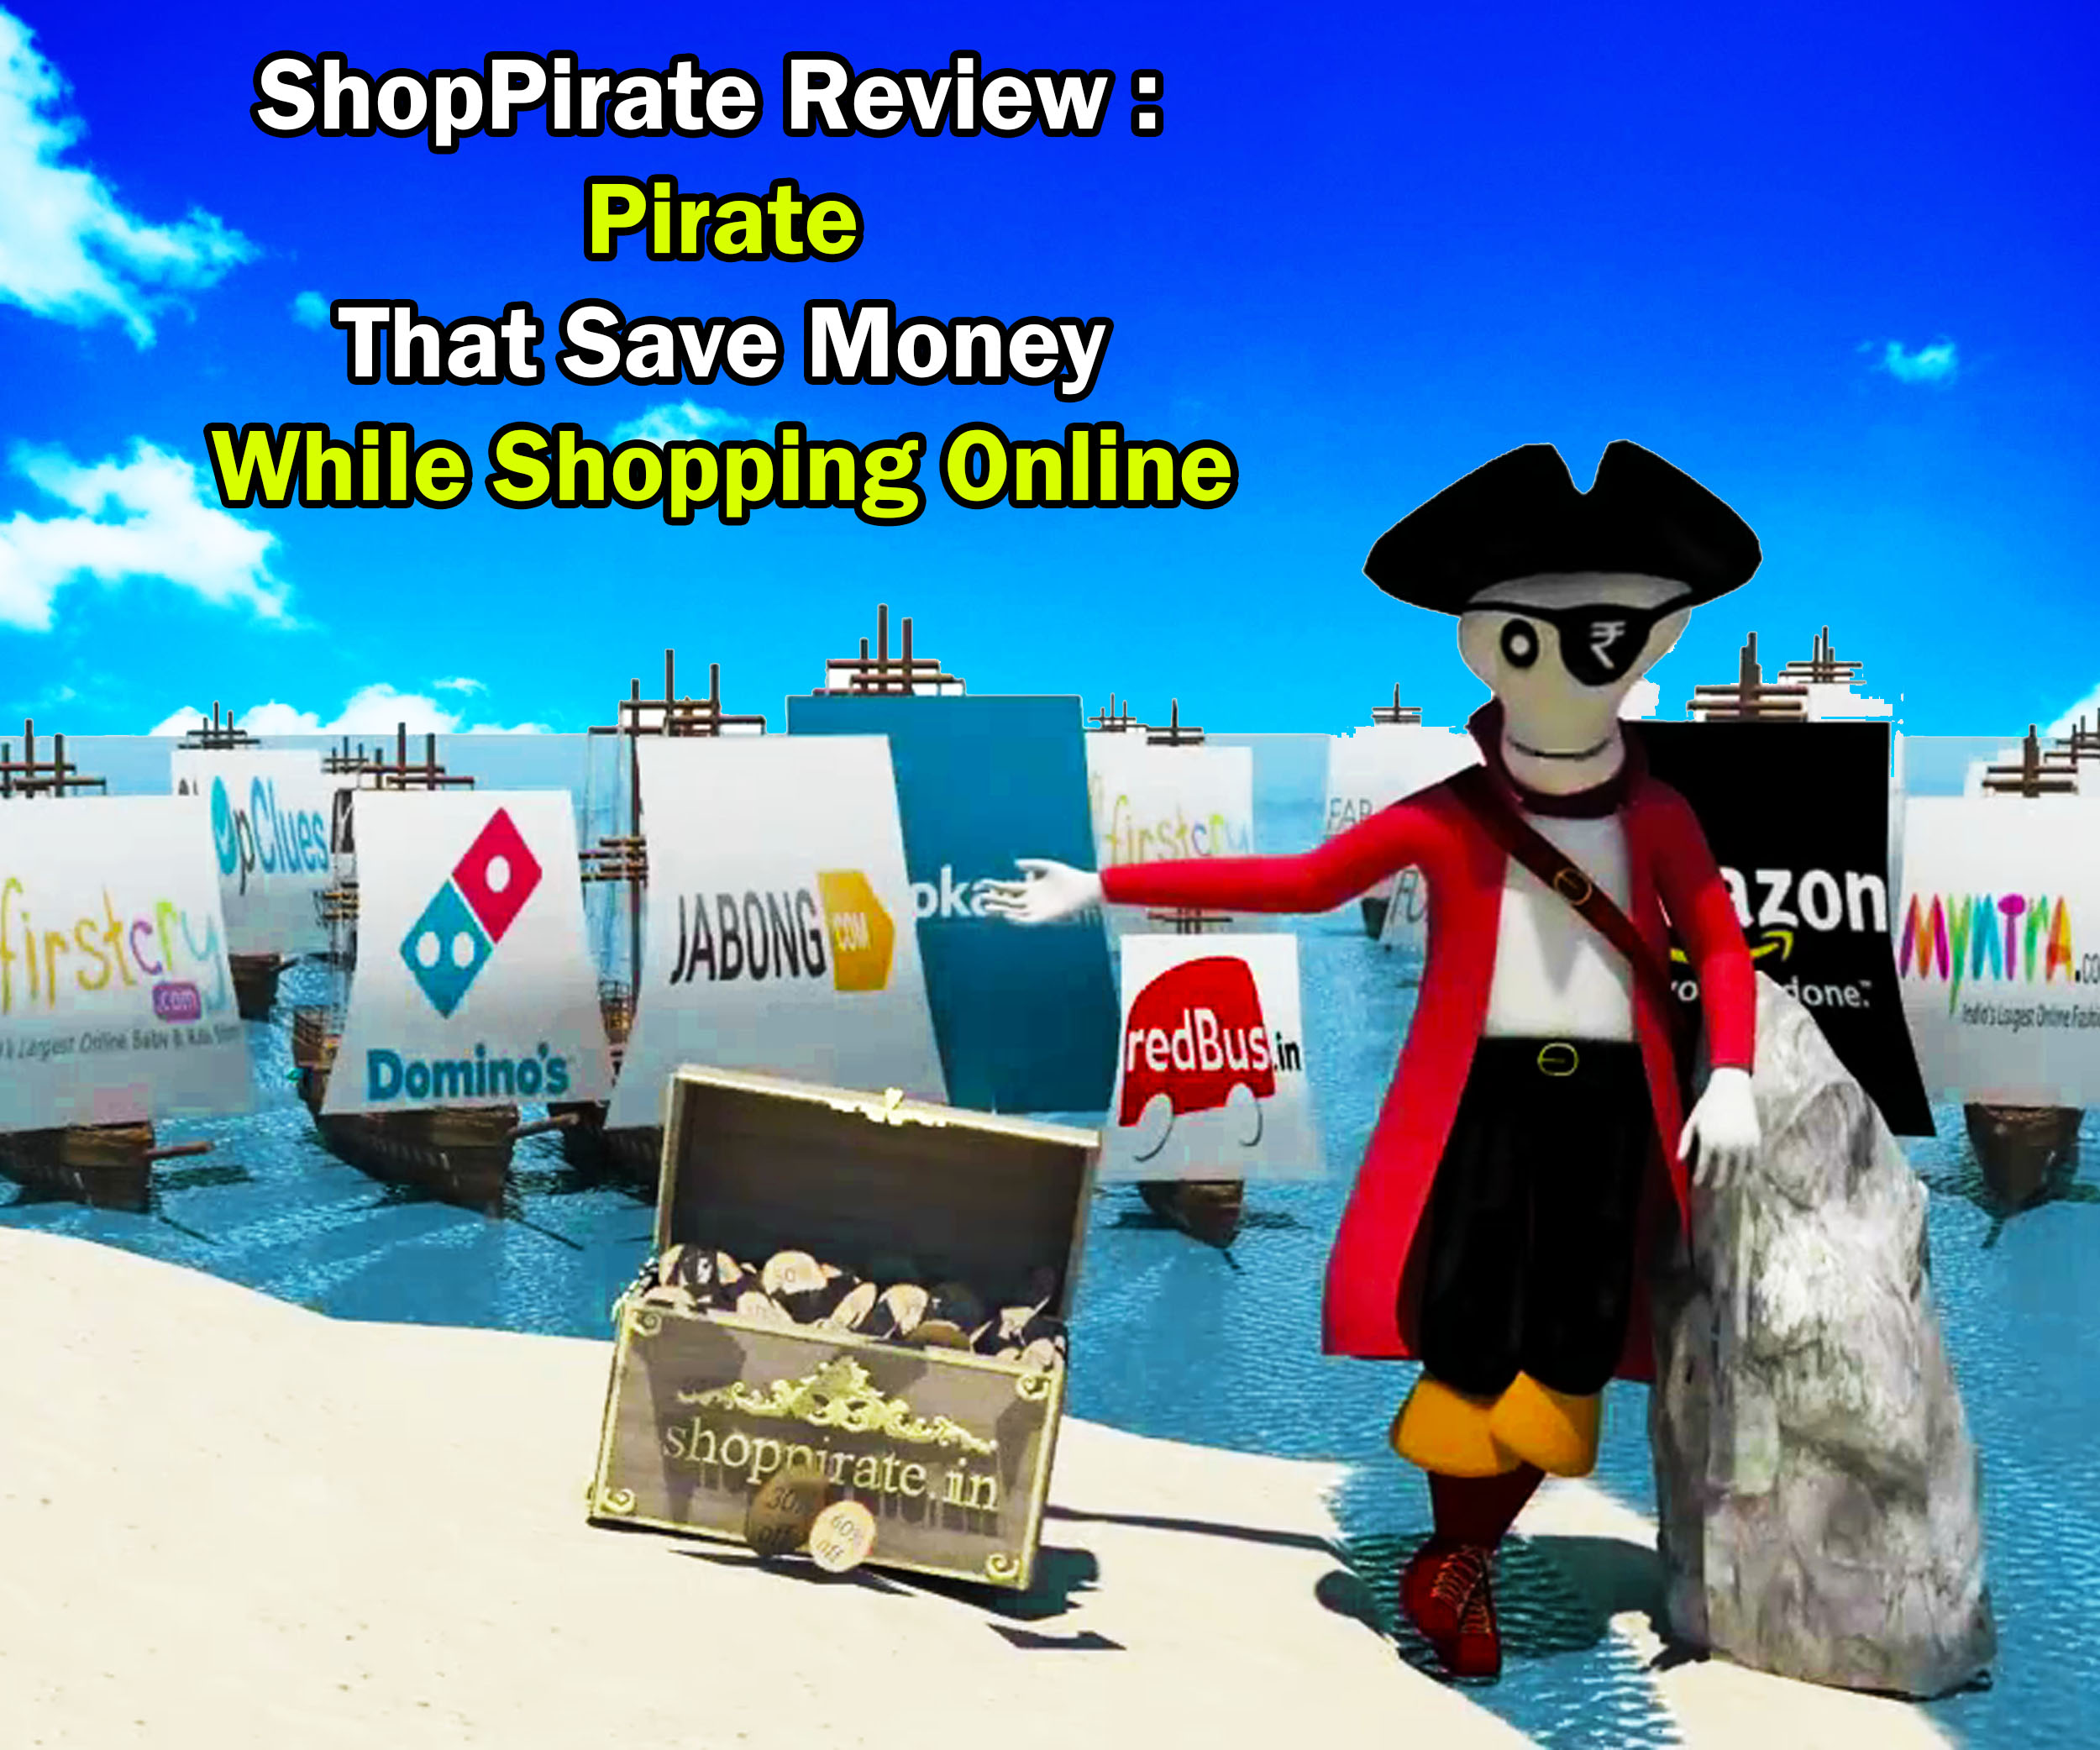 ShopPirate Review 2016